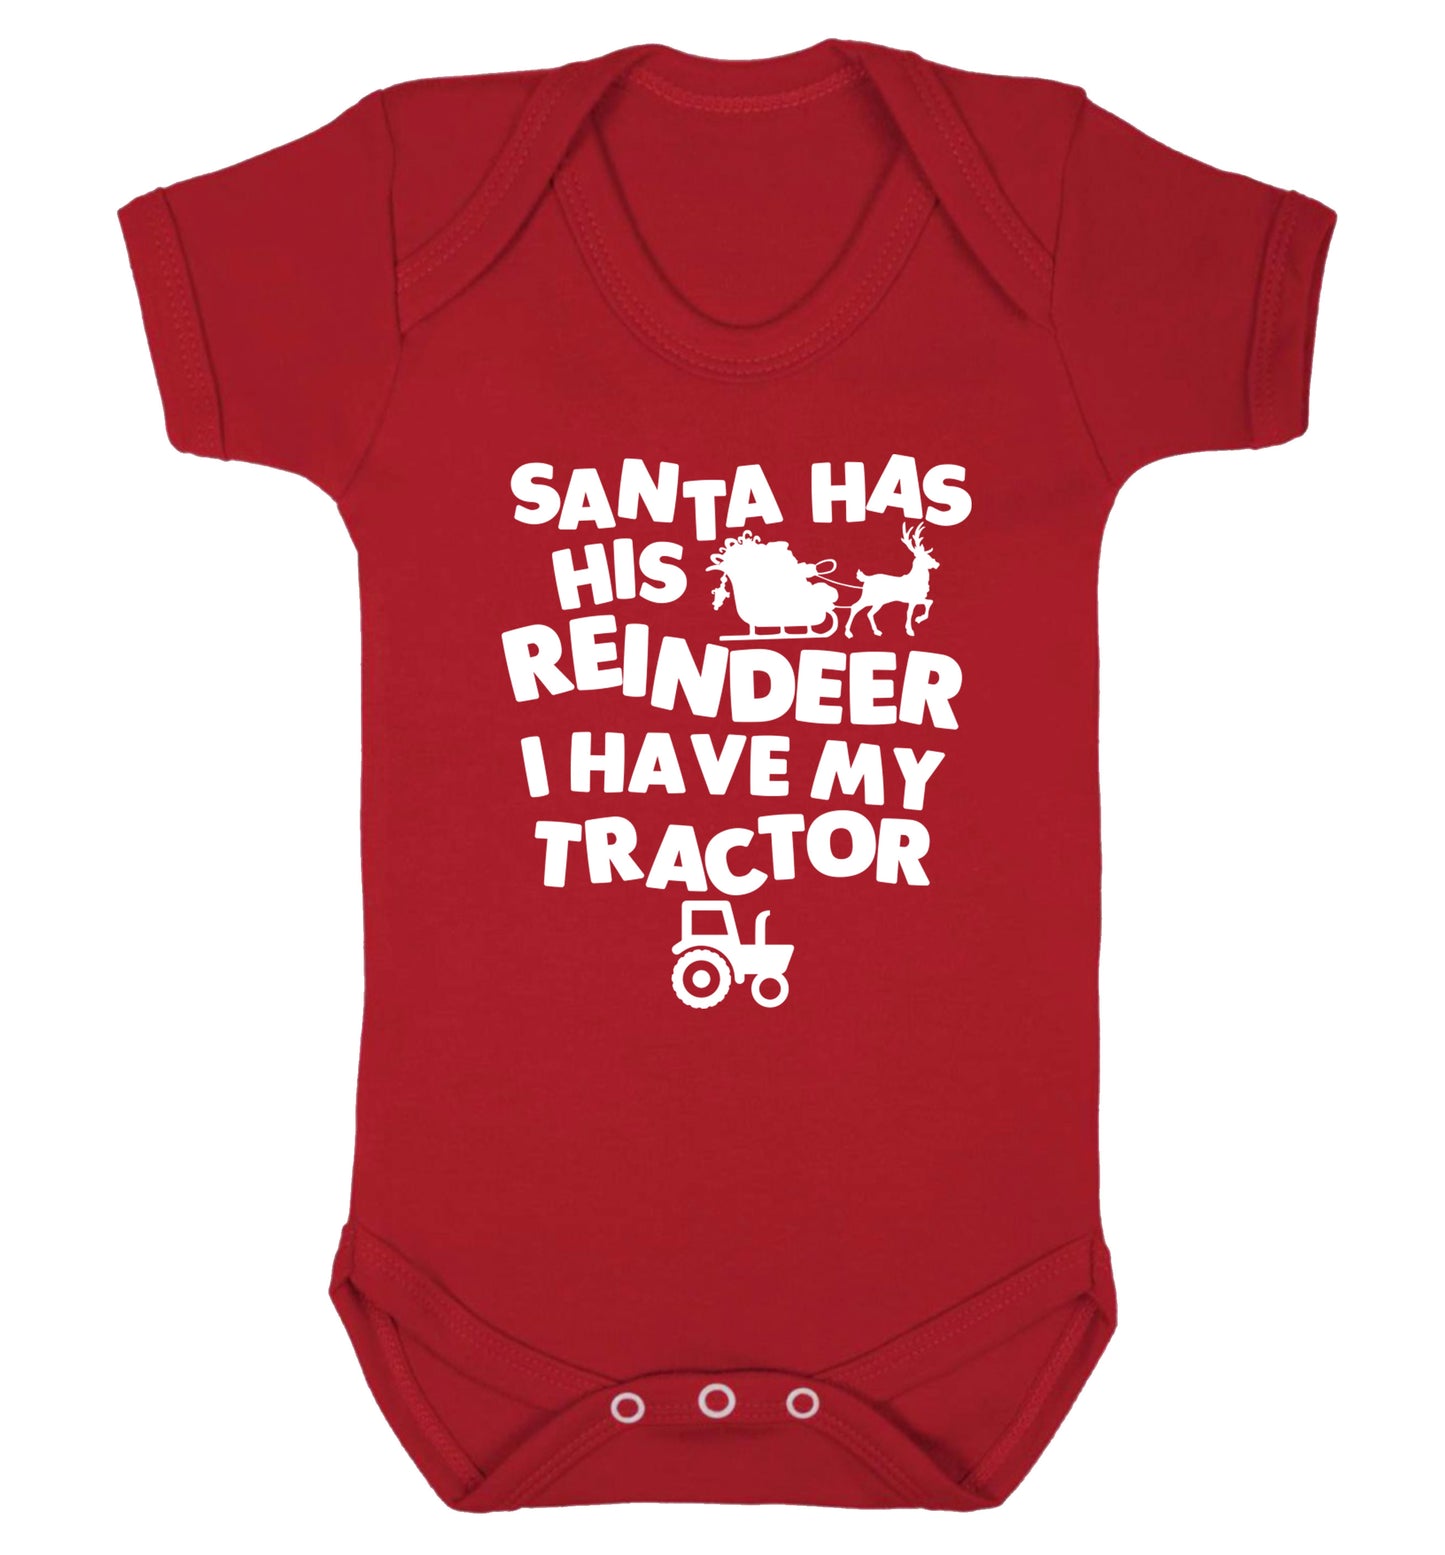 Santa has his reindeer I have my tractor Baby Vest red 18-24 months